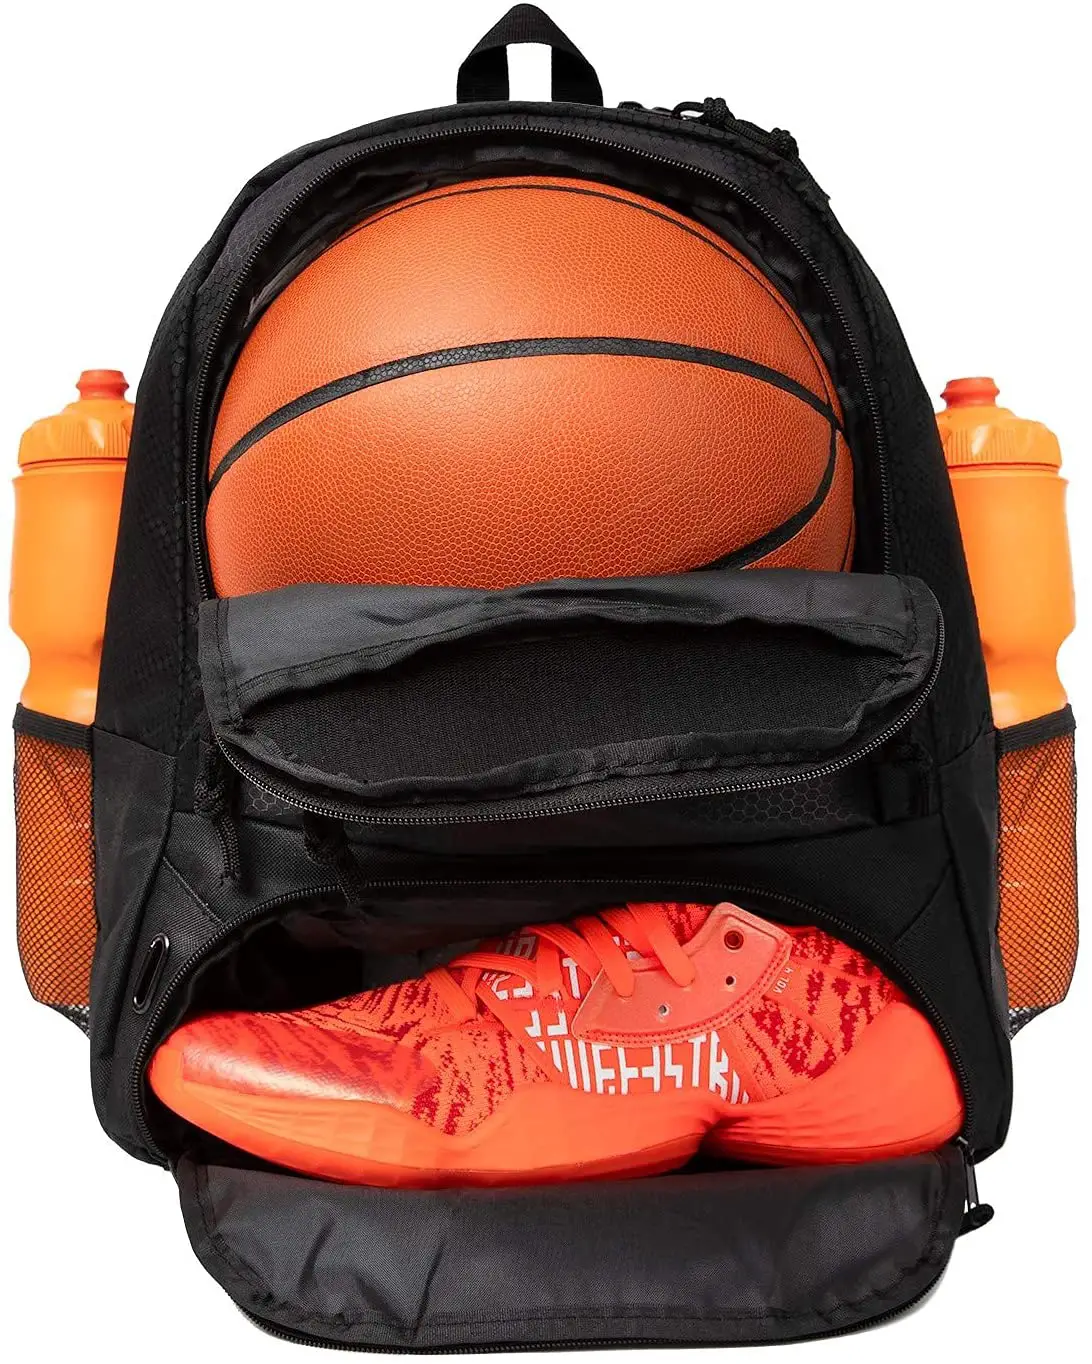 Do You Know What to Carry In A Basketball Bag?